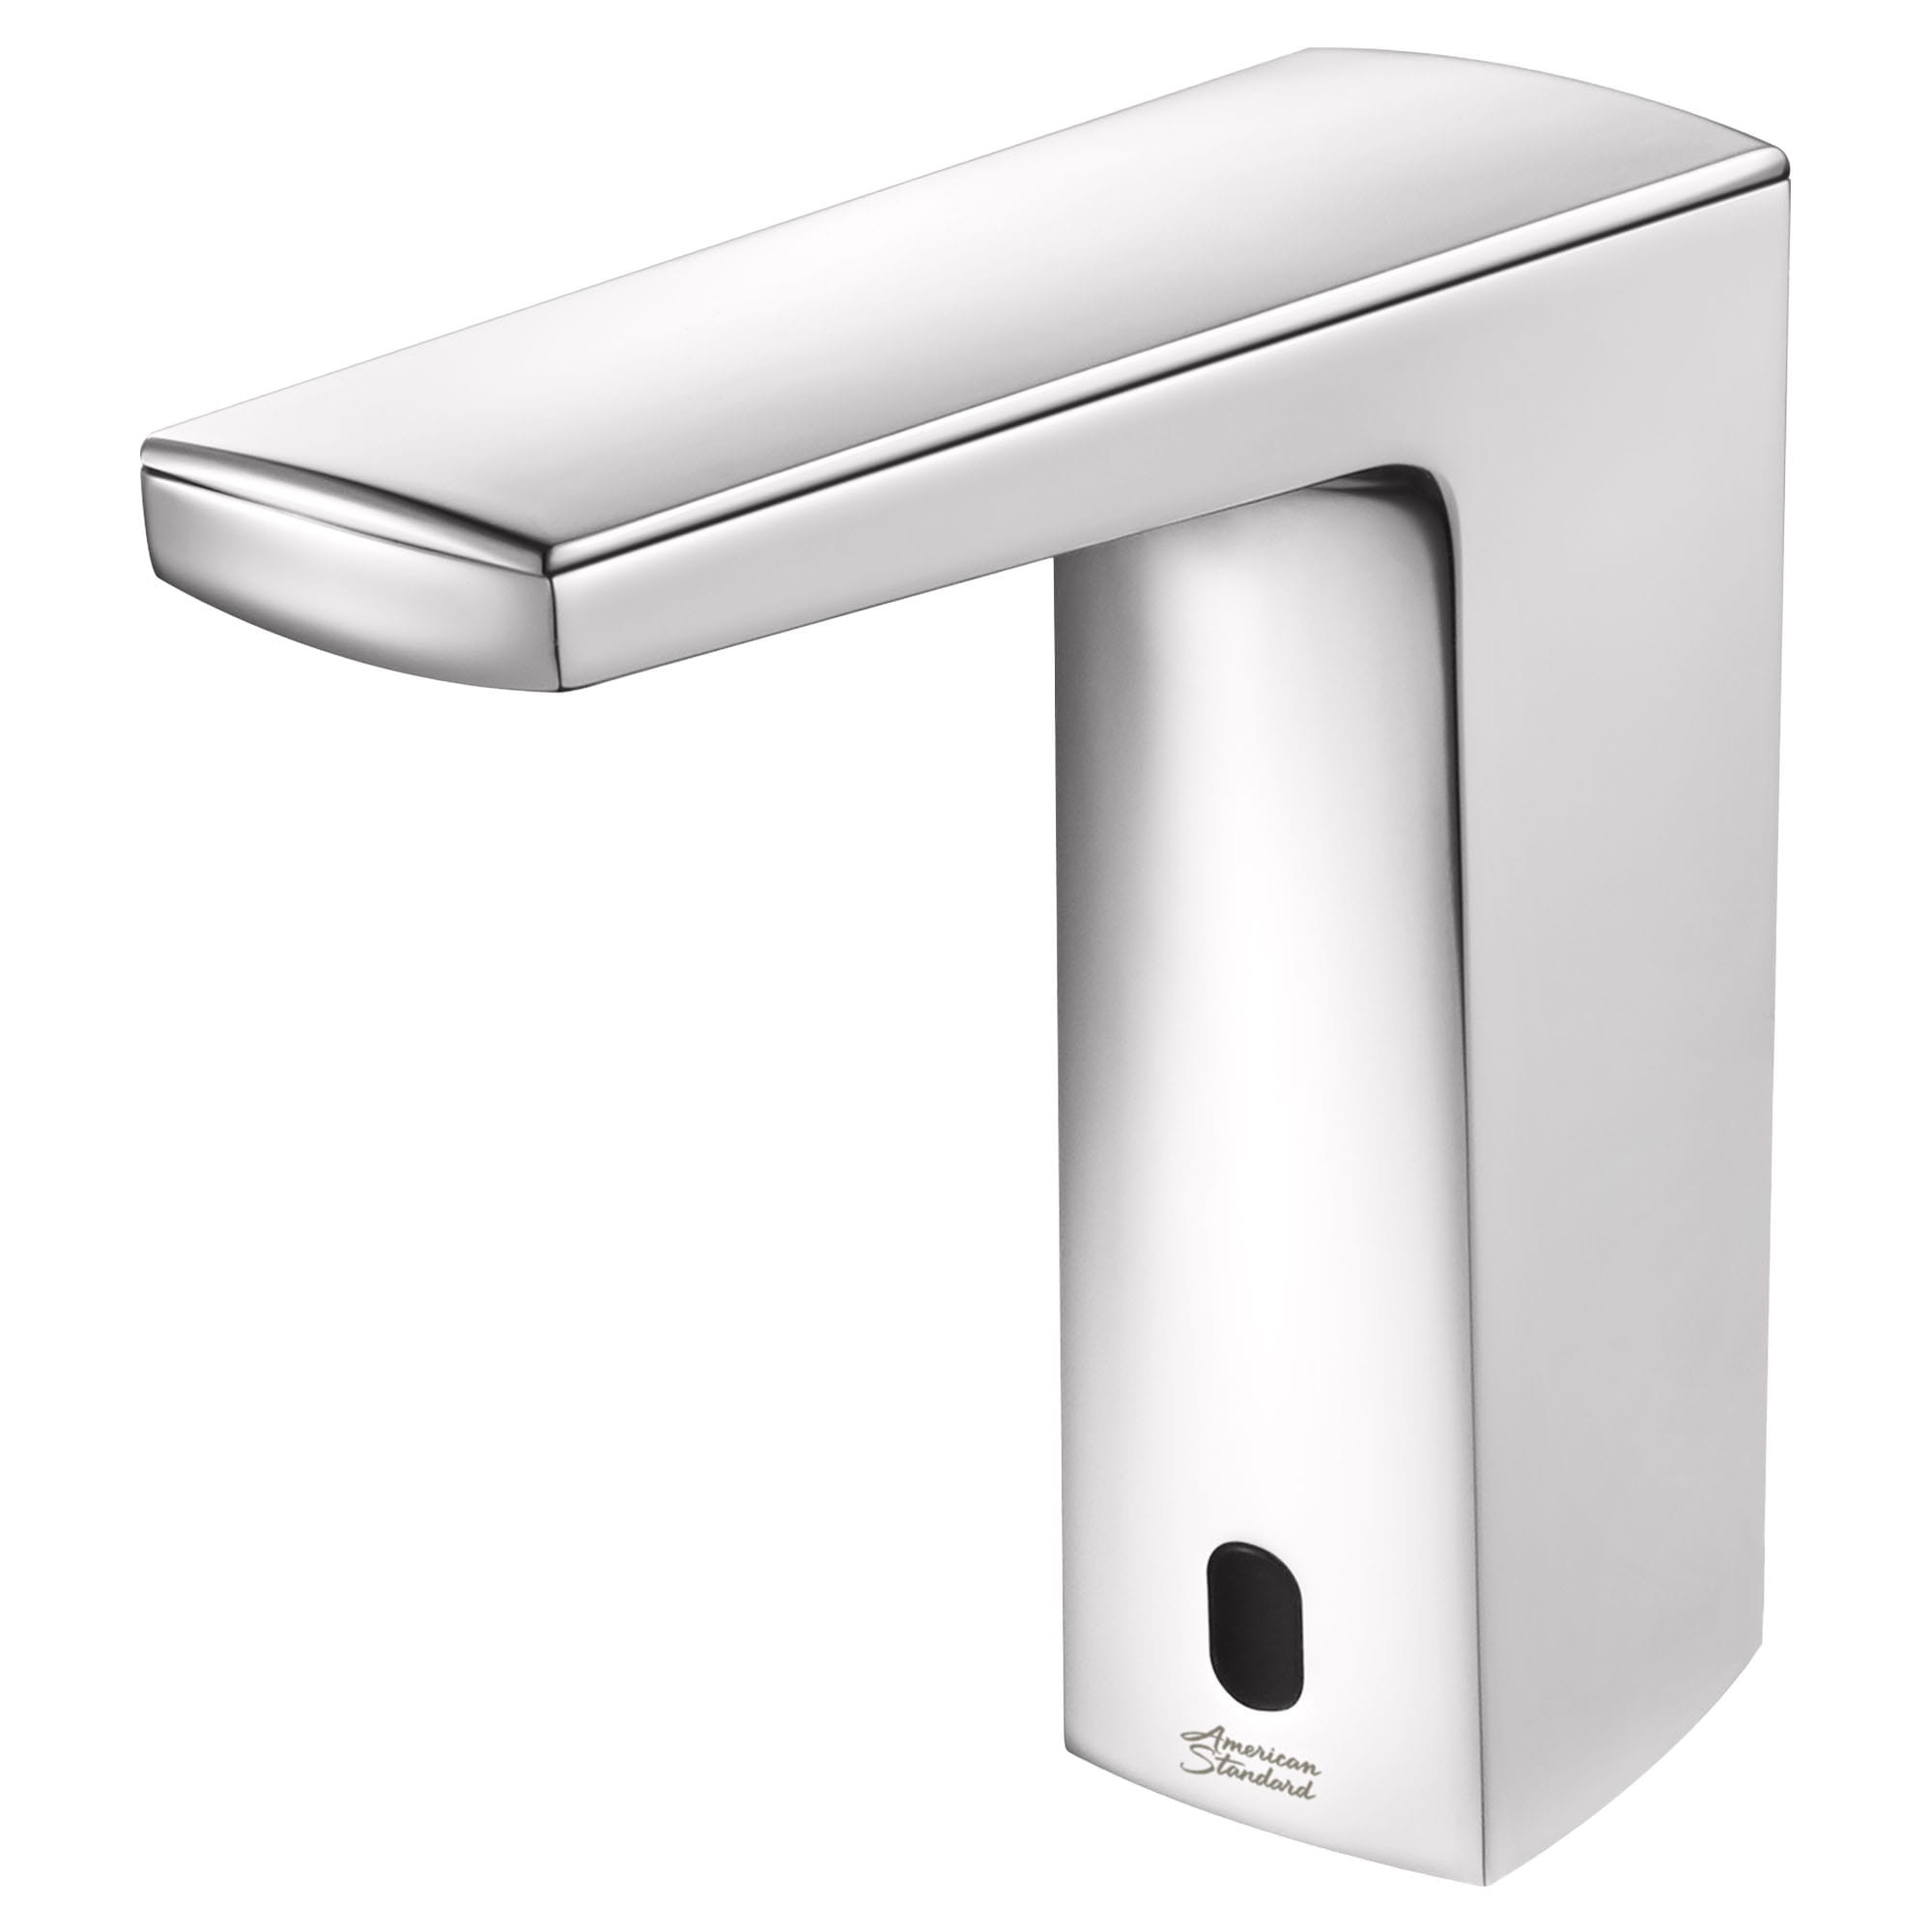 Paradigm® Selectronic® Touchless Faucet, Base Model, 0.35 gpm/1.3 Lpm